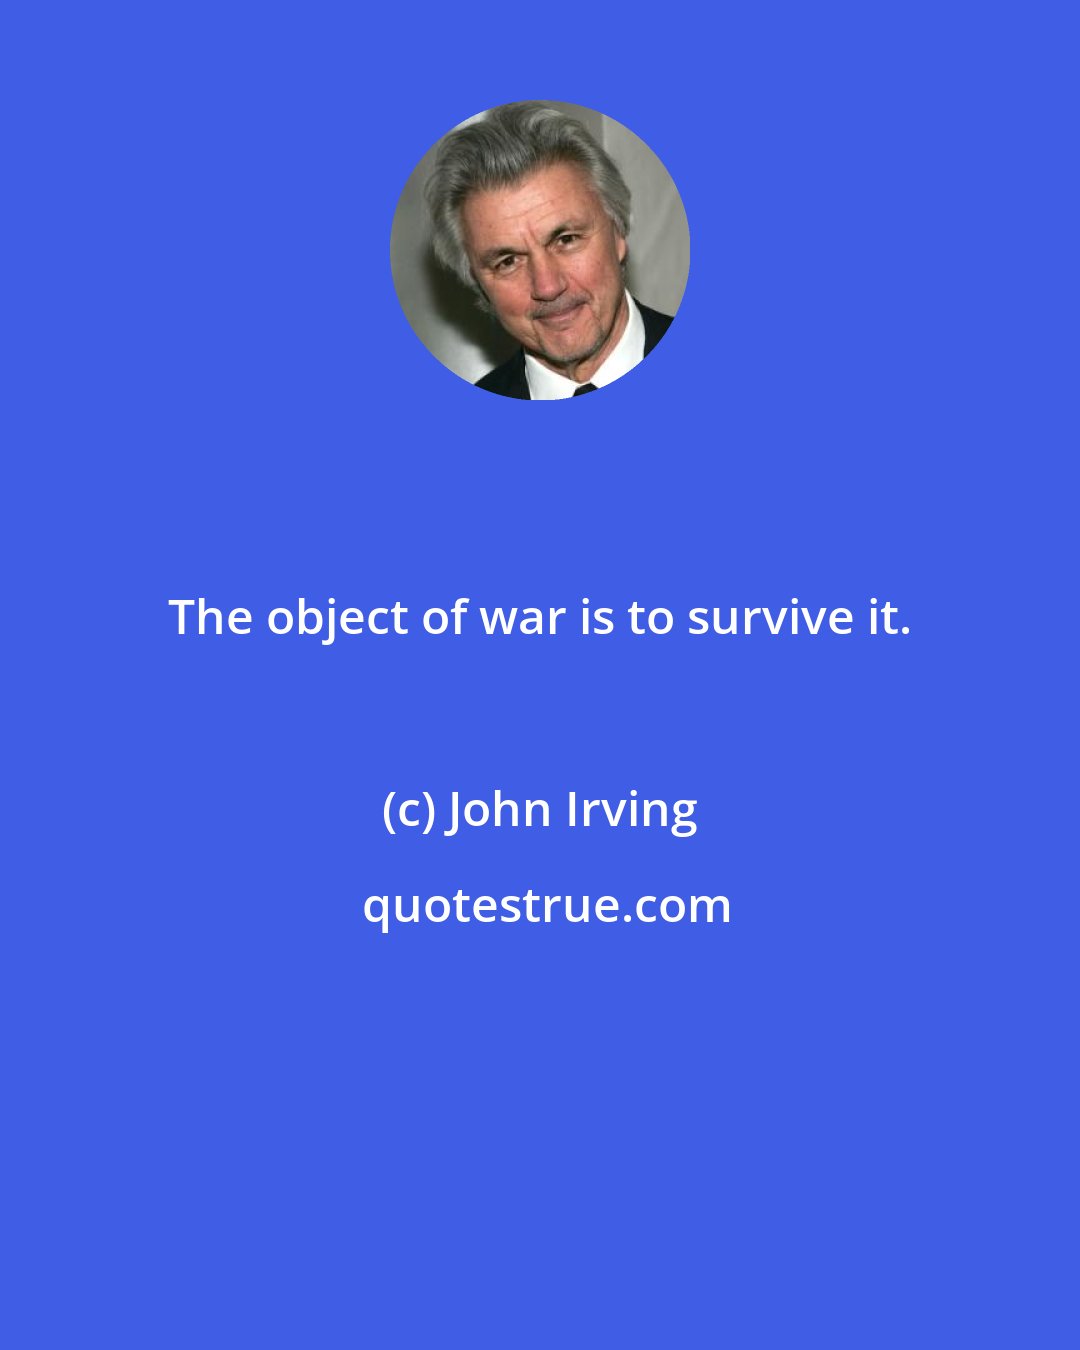 John Irving: The object of war is to survive it.